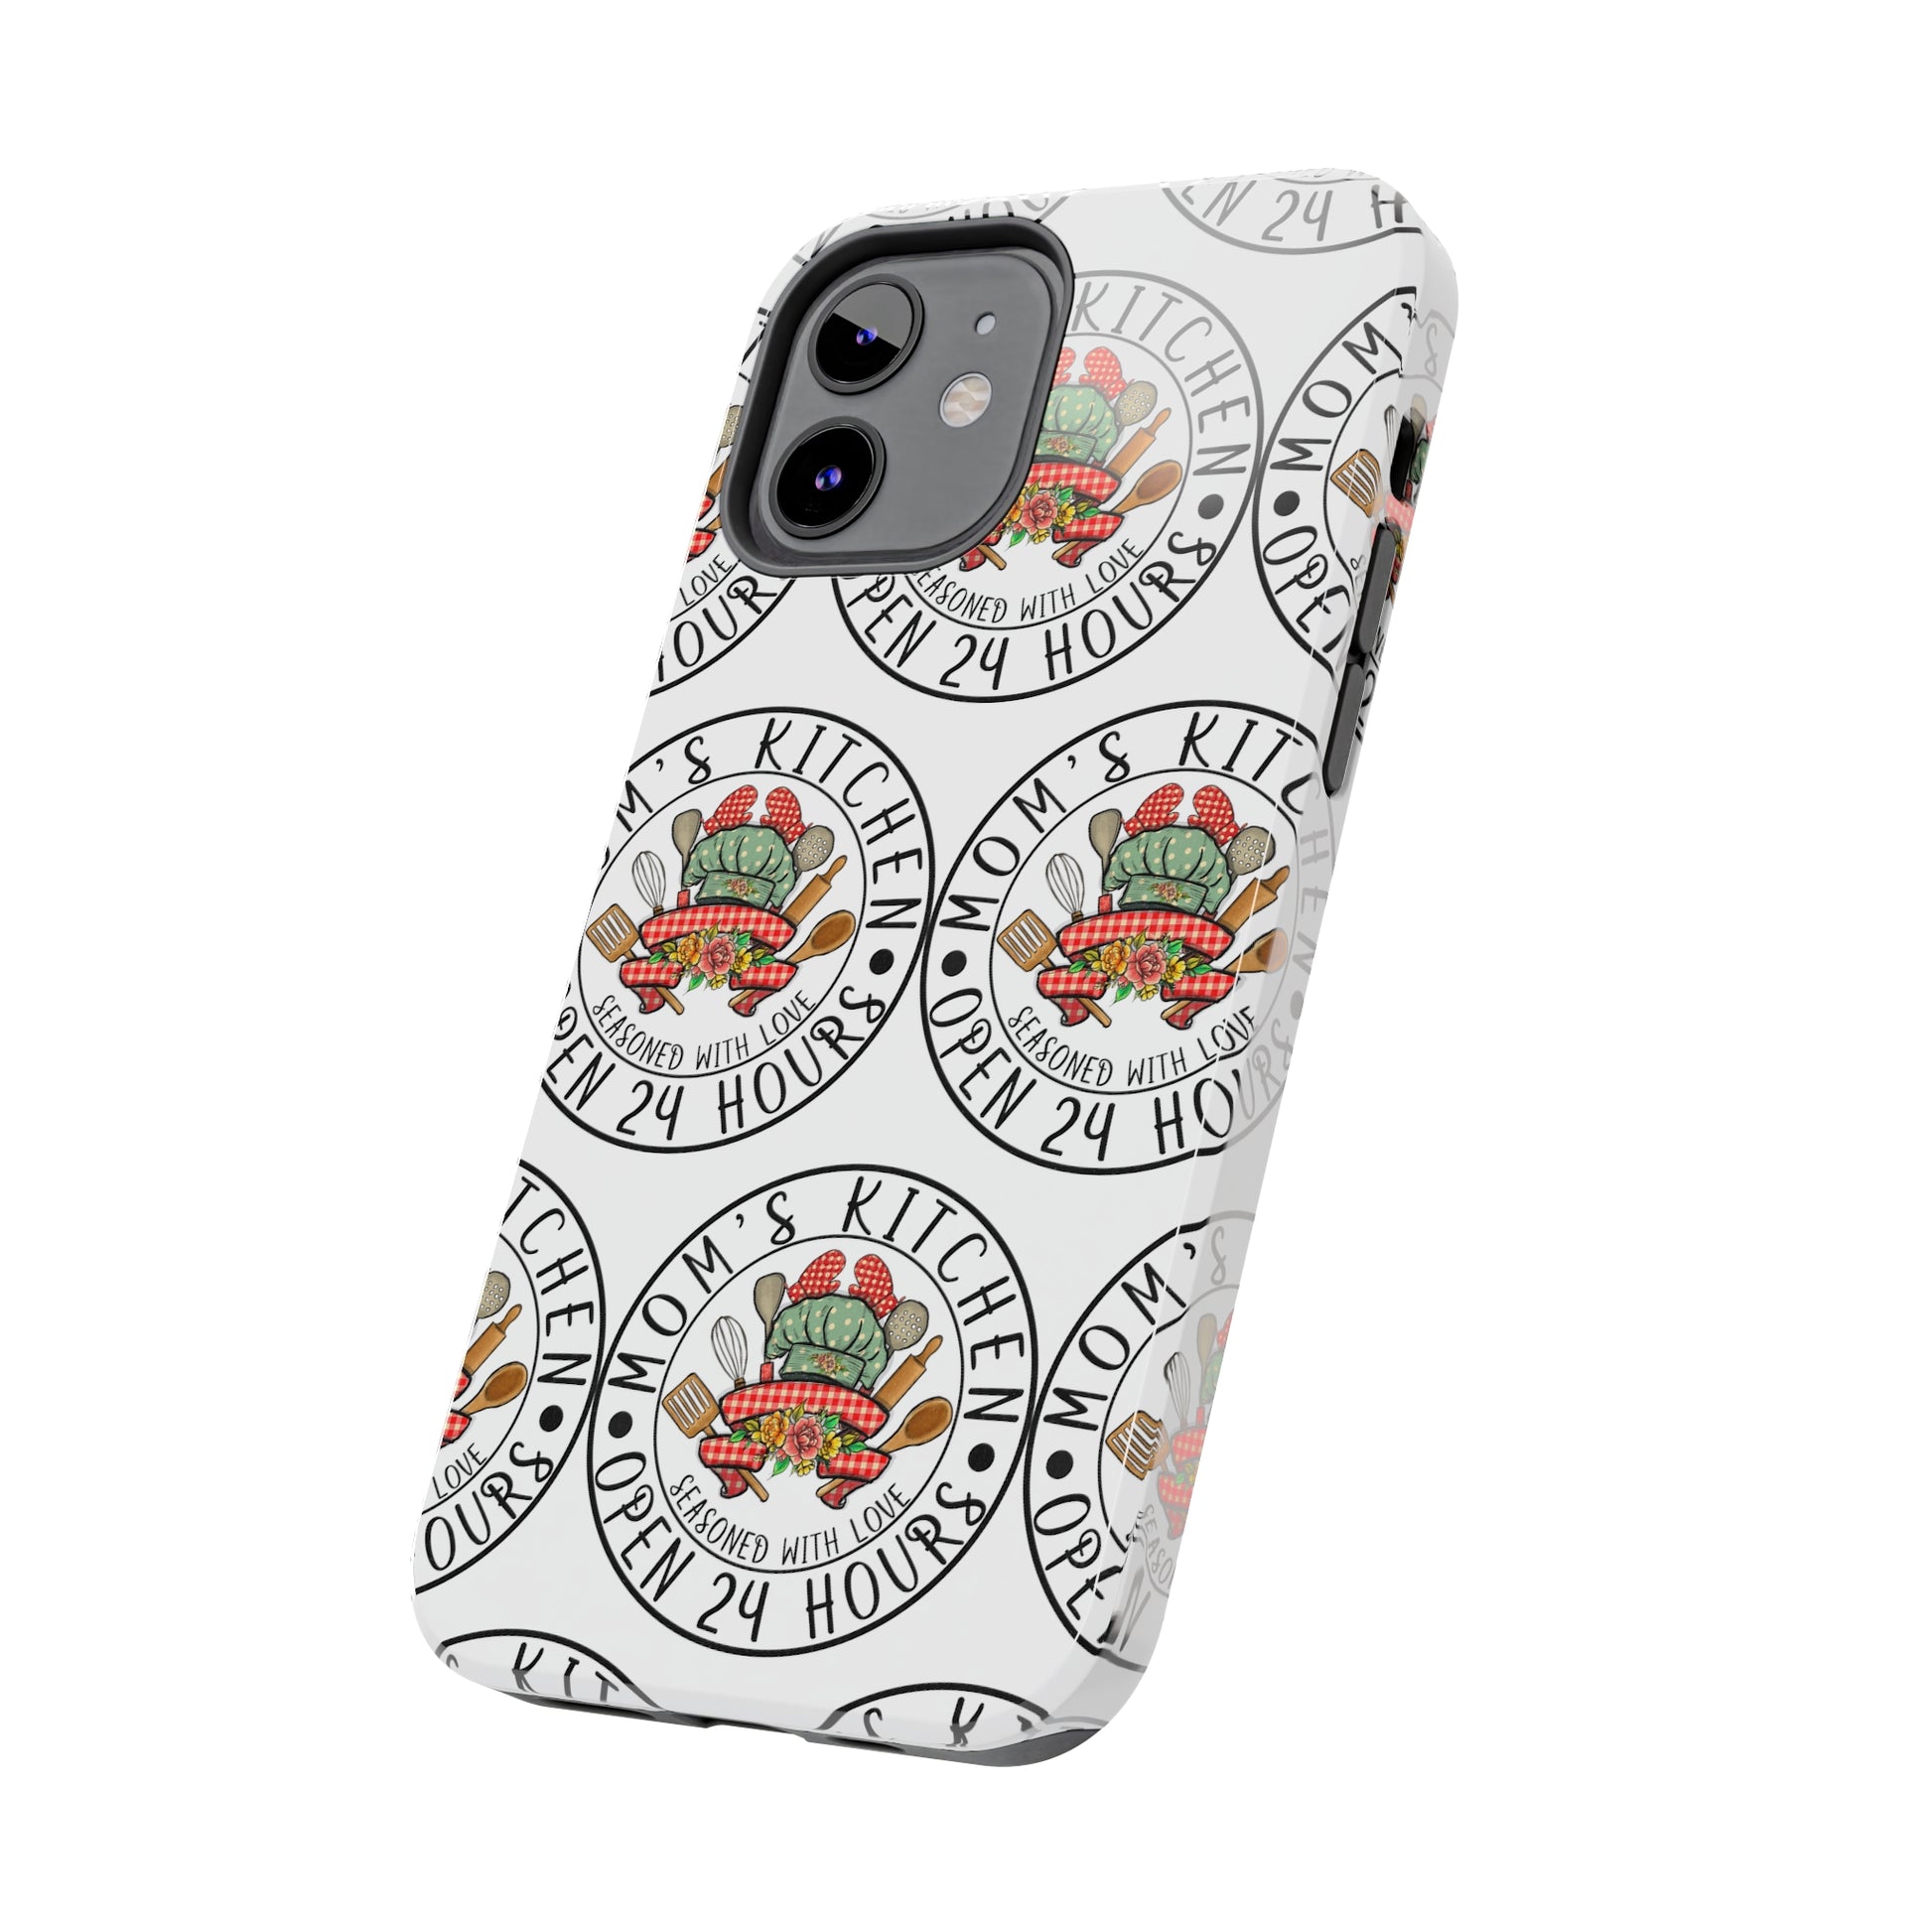 Mom's Kitchen: iPhone Tough Case Design - Wireless Charging - Superior Protection - Original Designs by TheGlassyLass.com